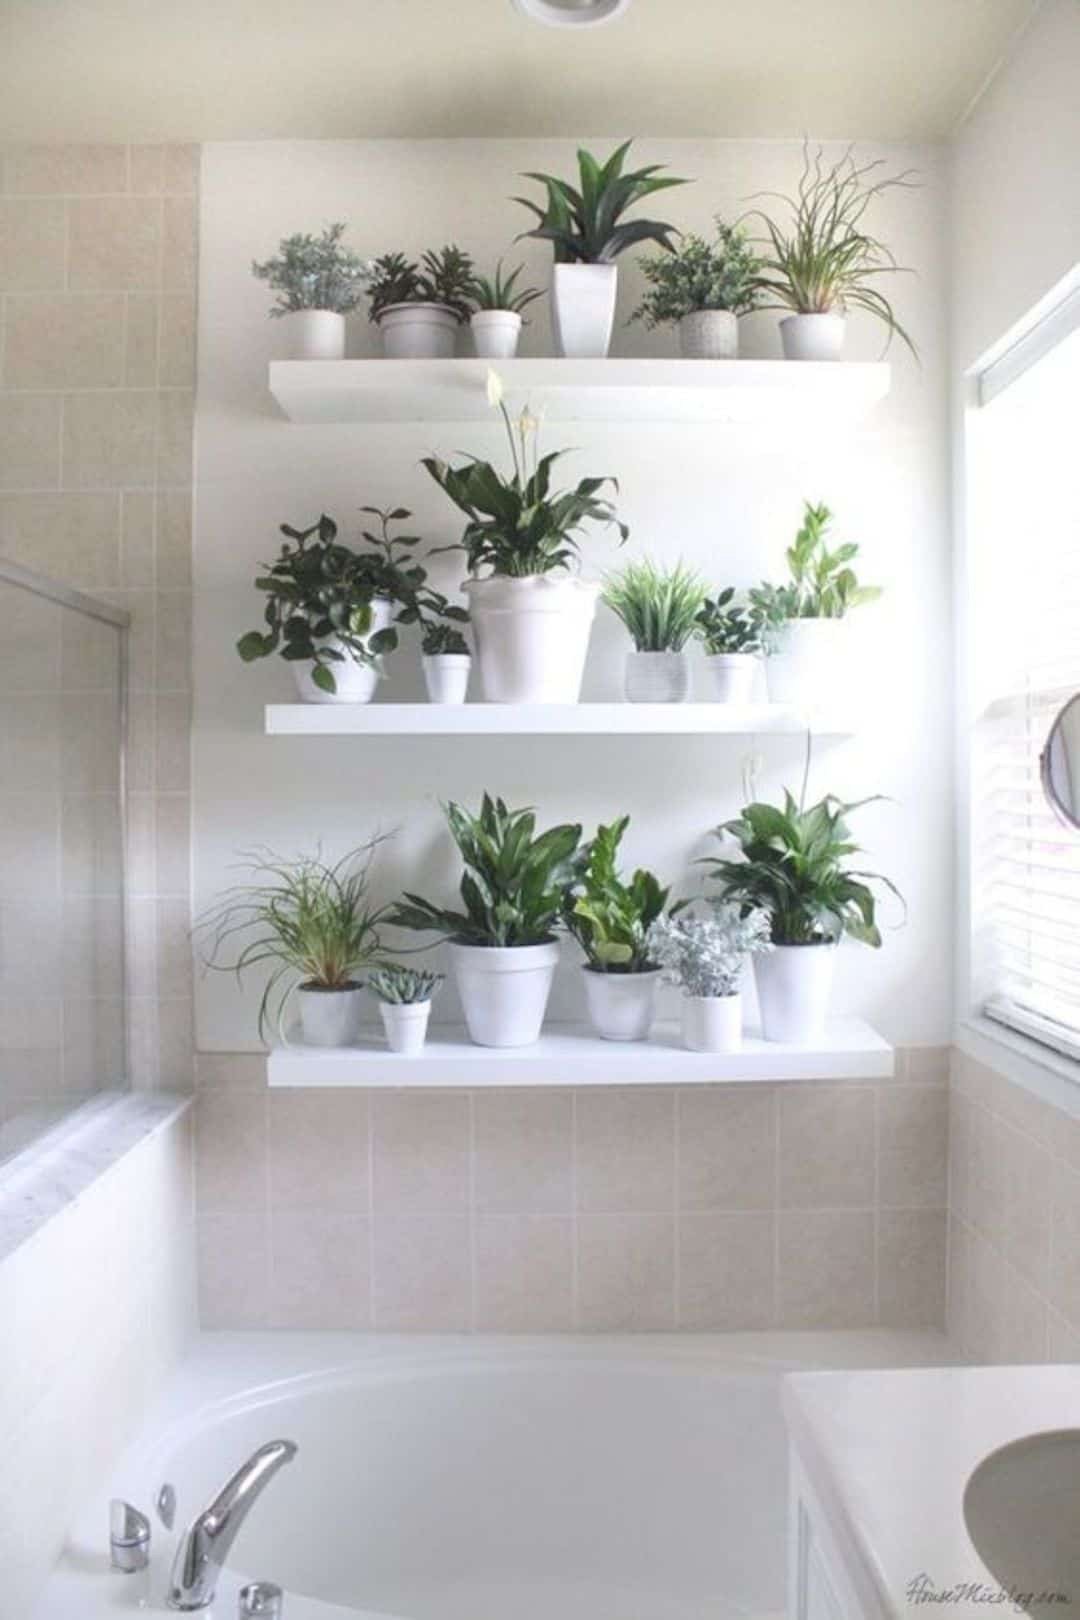 Using Plants In Home Decor Beautiful 19 Unique Home Decor Ideas with Plants